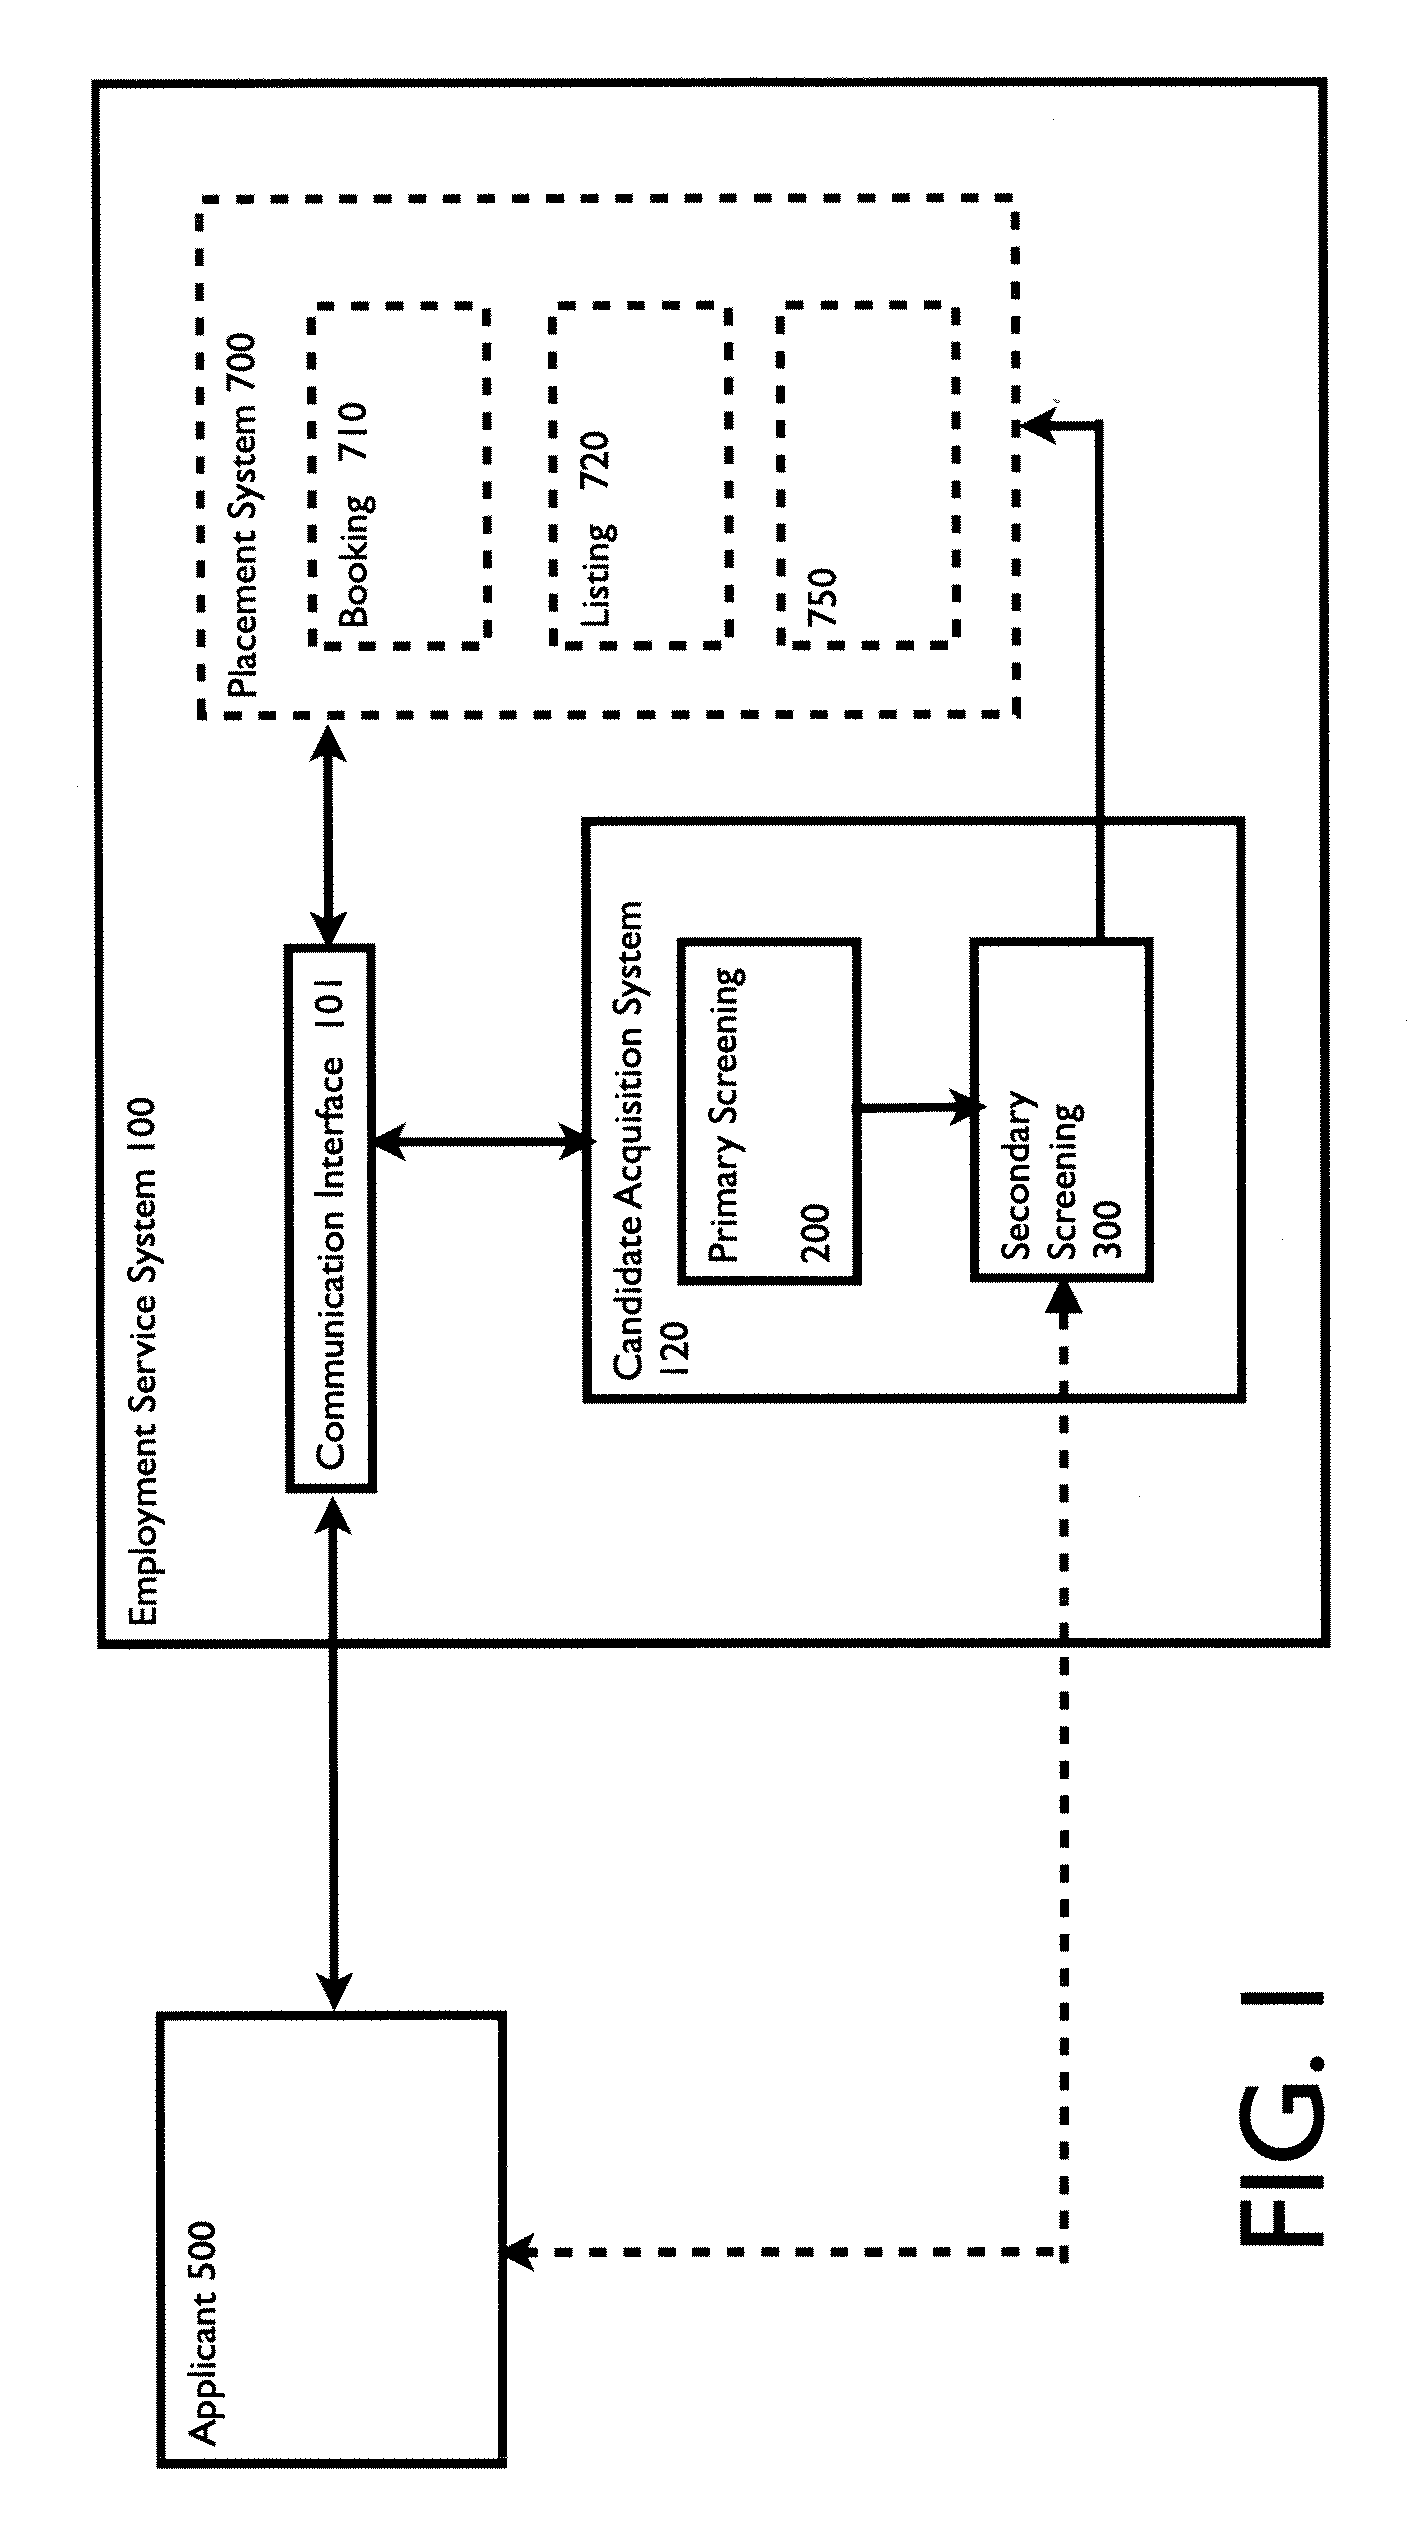 System and method for screening and processing applicants